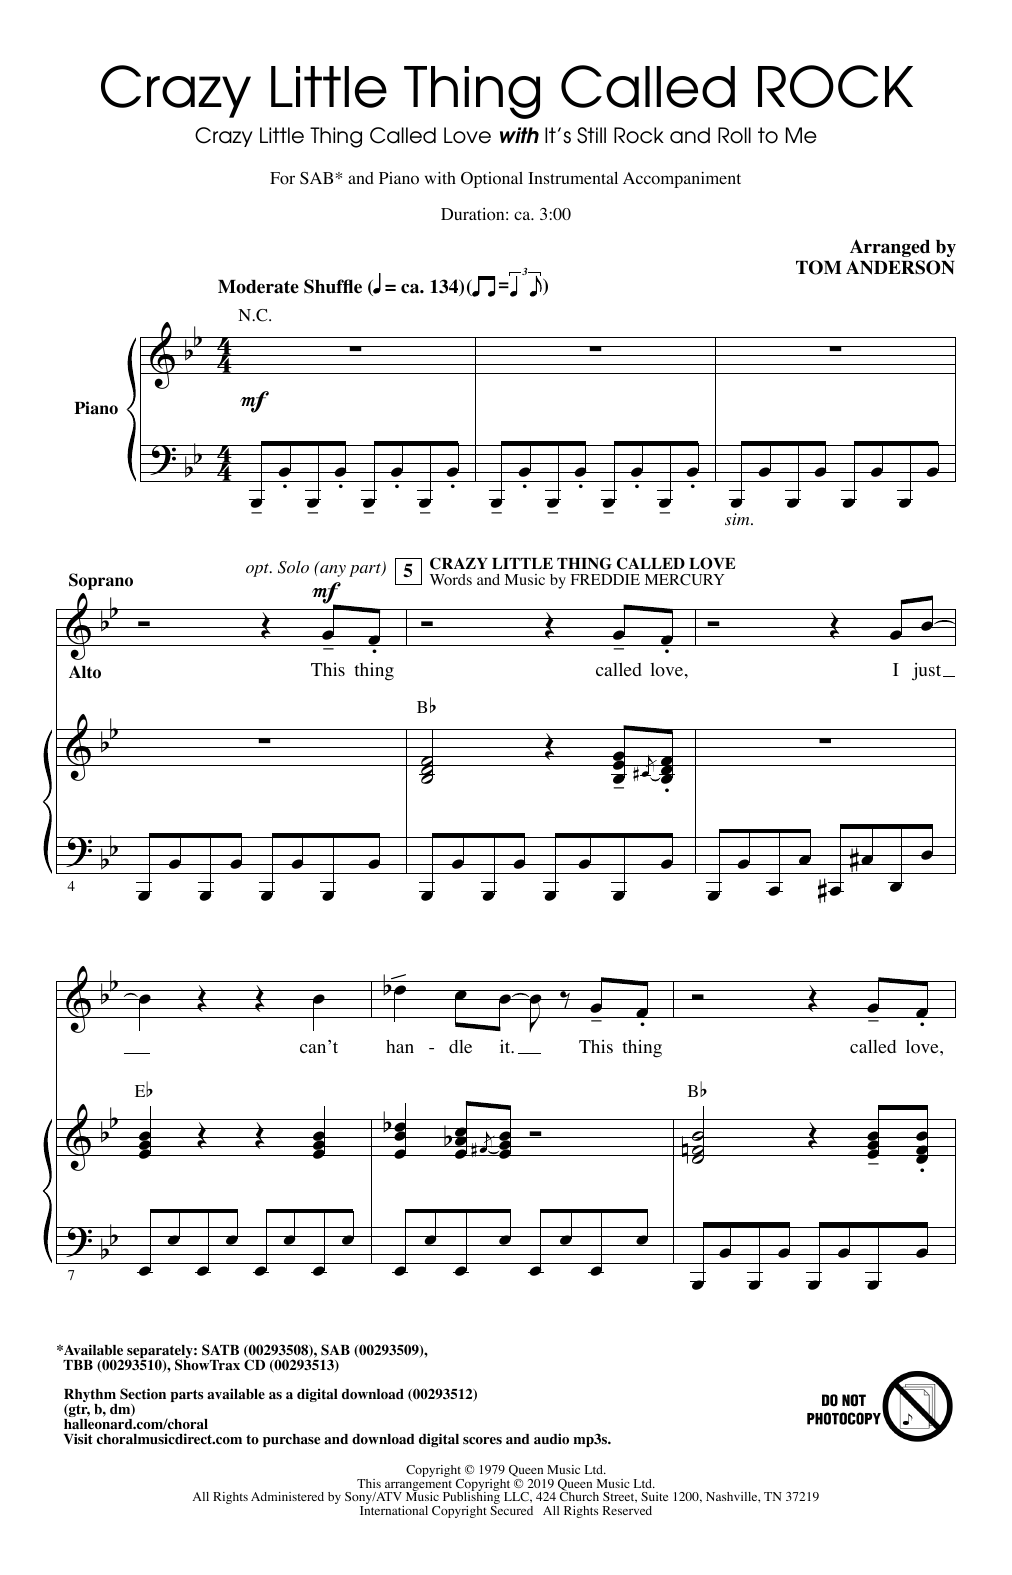 Download Queen & Billy Joel Crazy Little Thing Called ROCK (arr. To Sheet Music